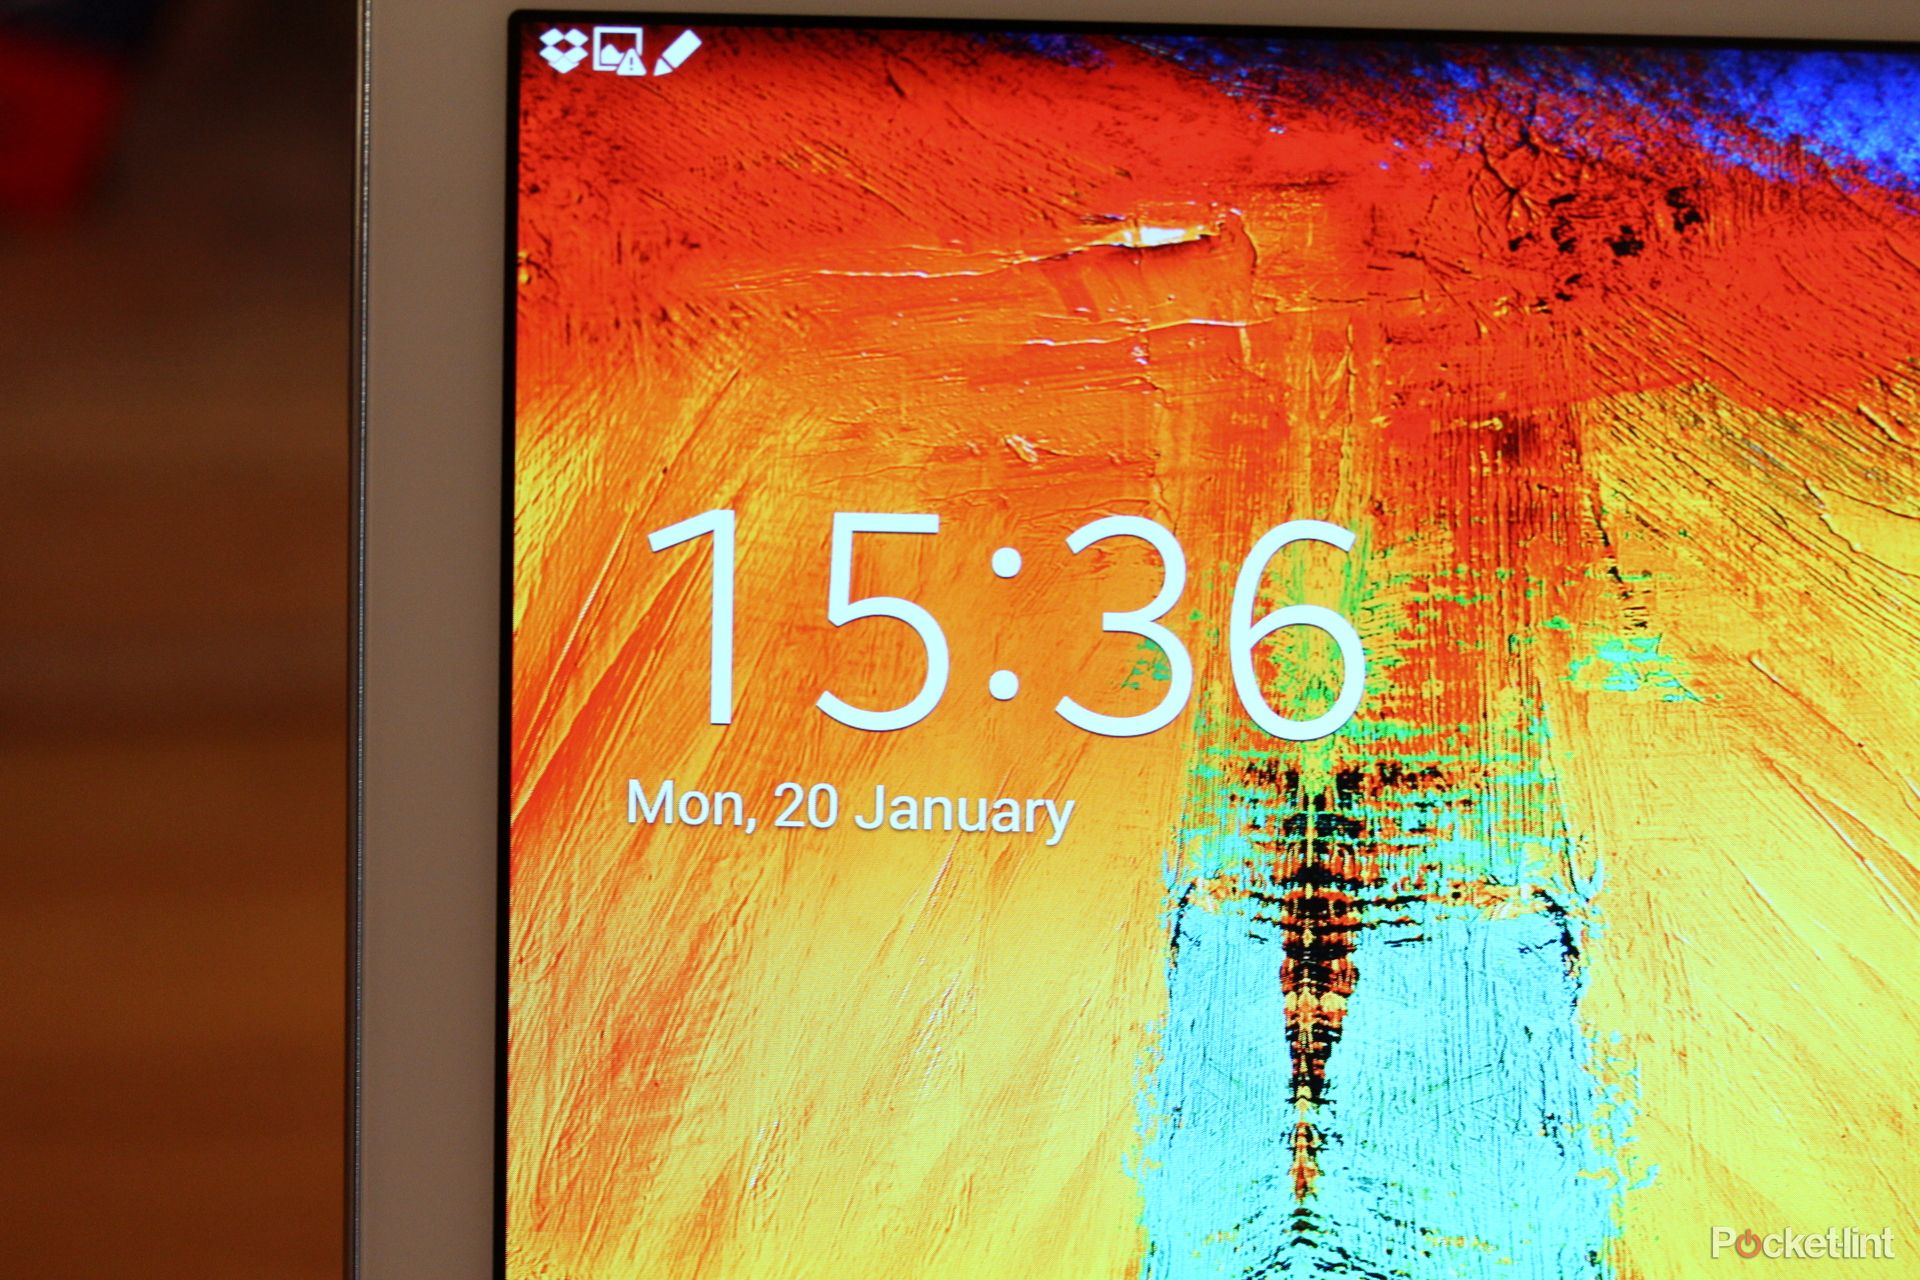 samsung galaxy note 10 1 review 2014 edition image 15